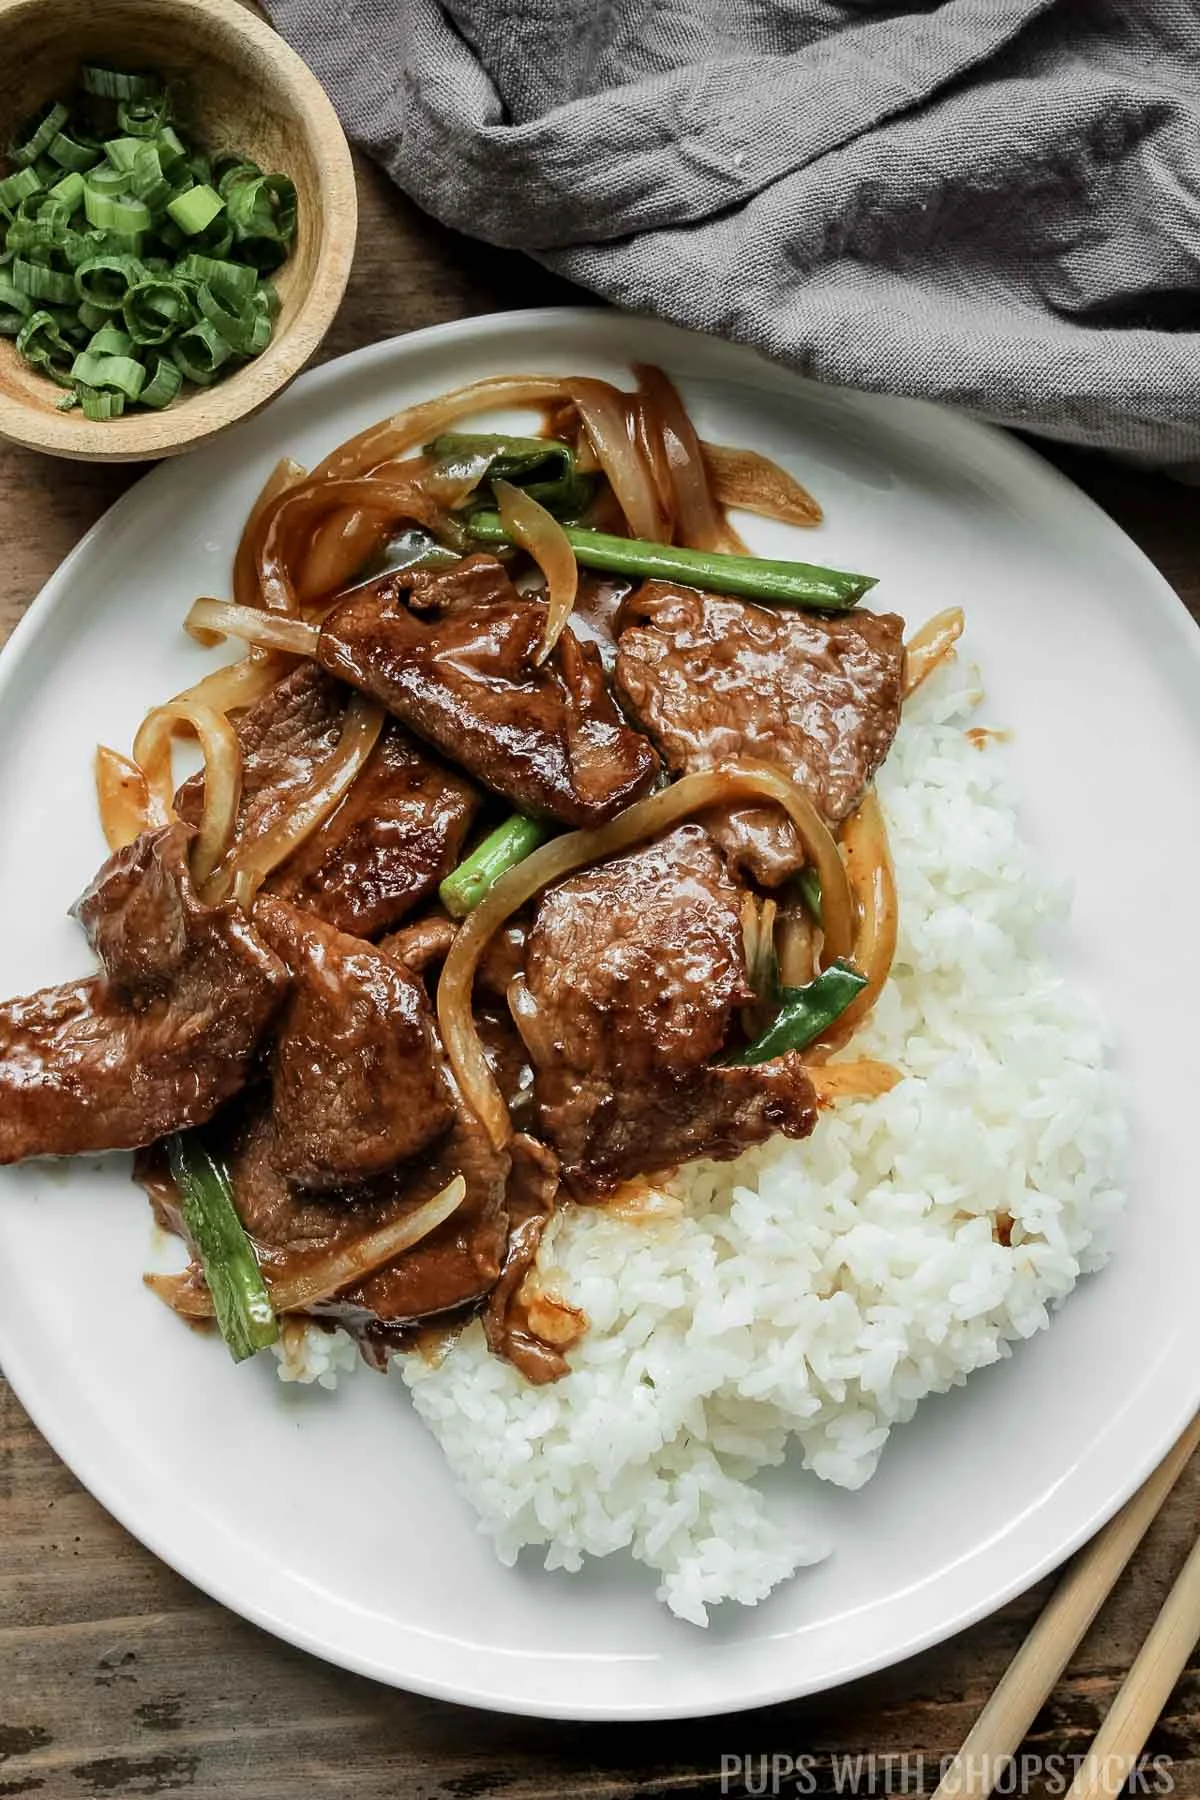 Beef and onion stir fry with a side of white rice on a white plate with a side of green onions.